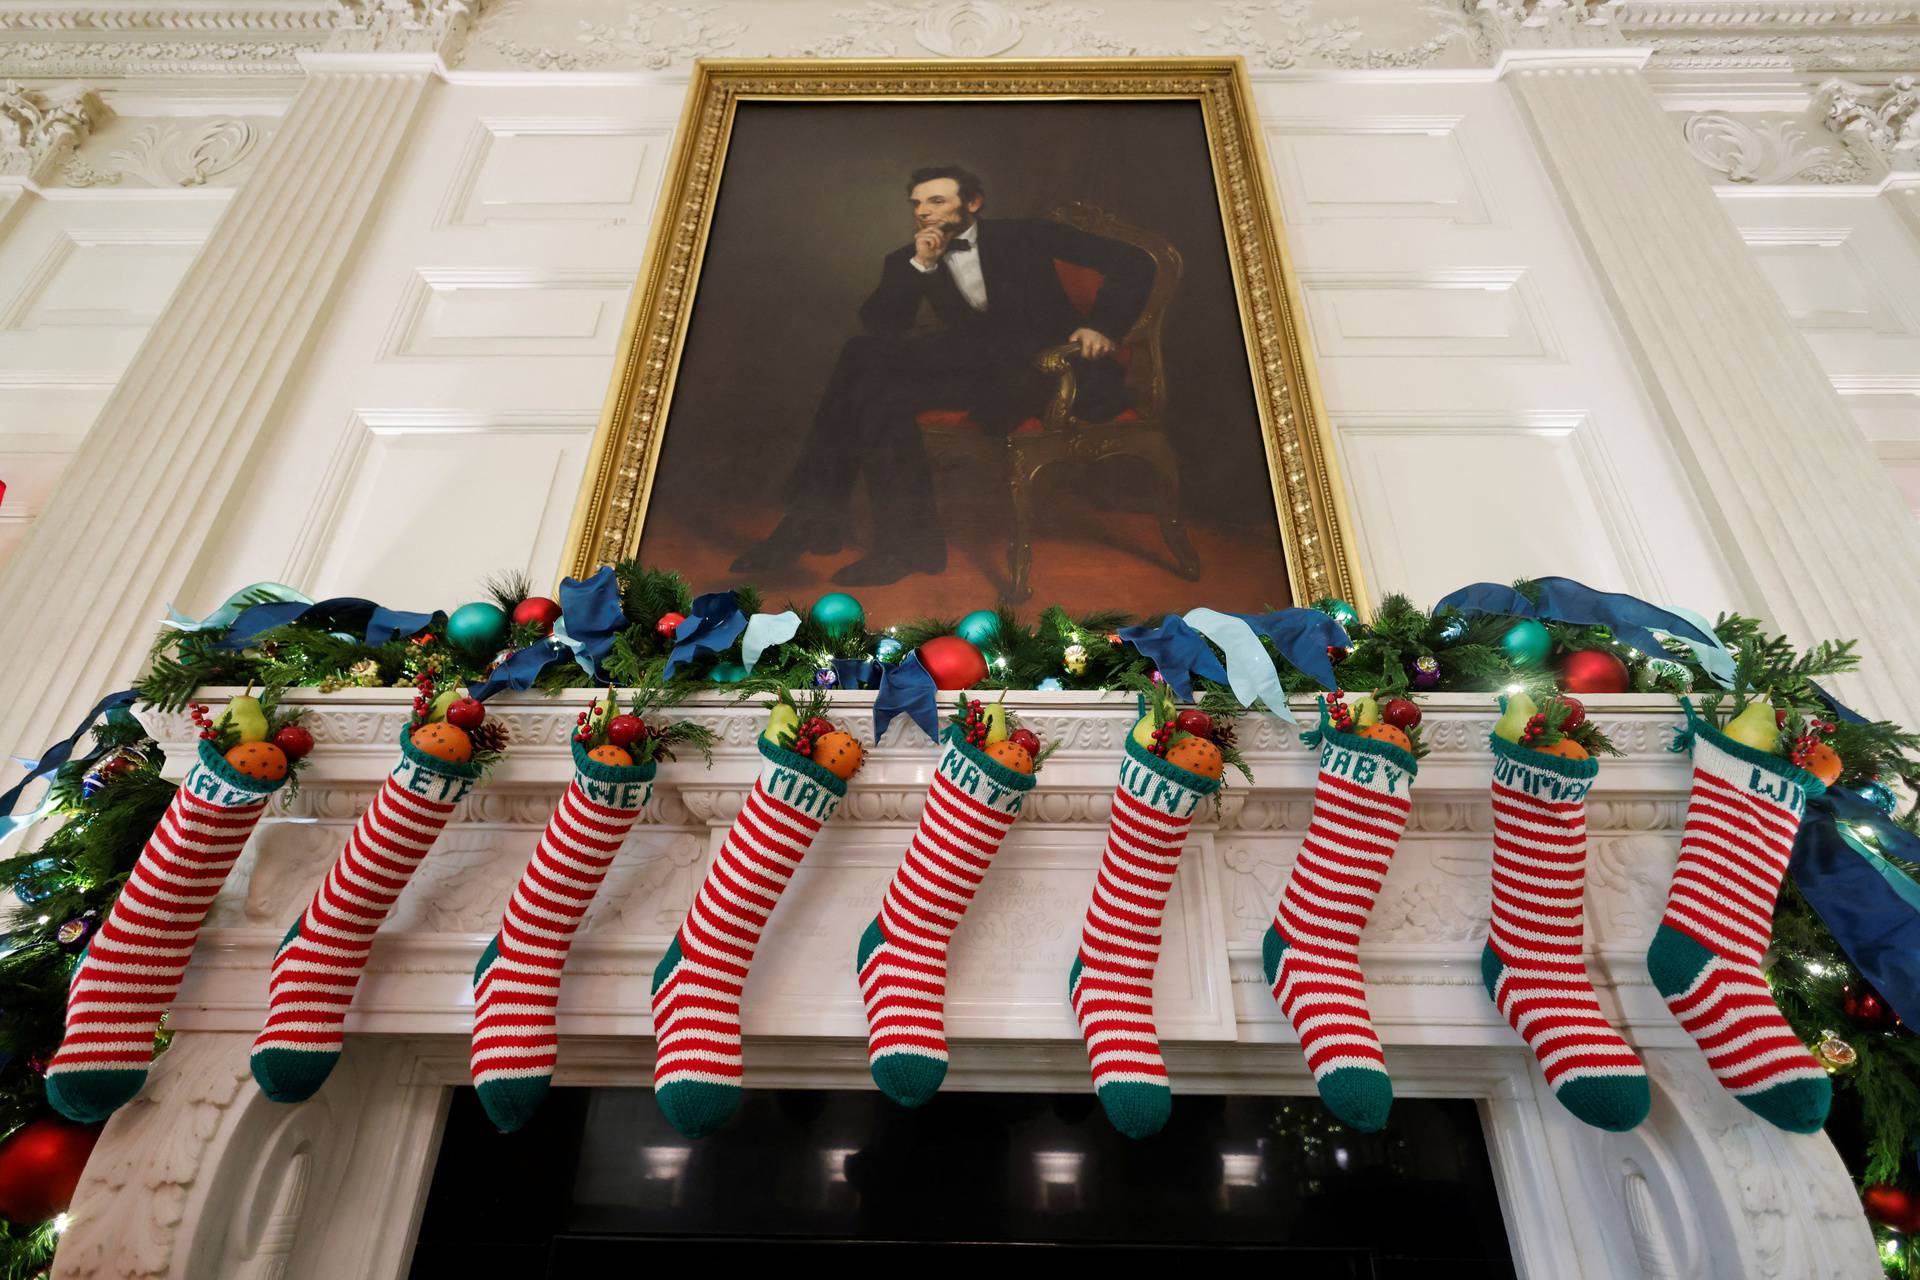 Christmas decorations on the theme "We the People" are unveiled at the White House